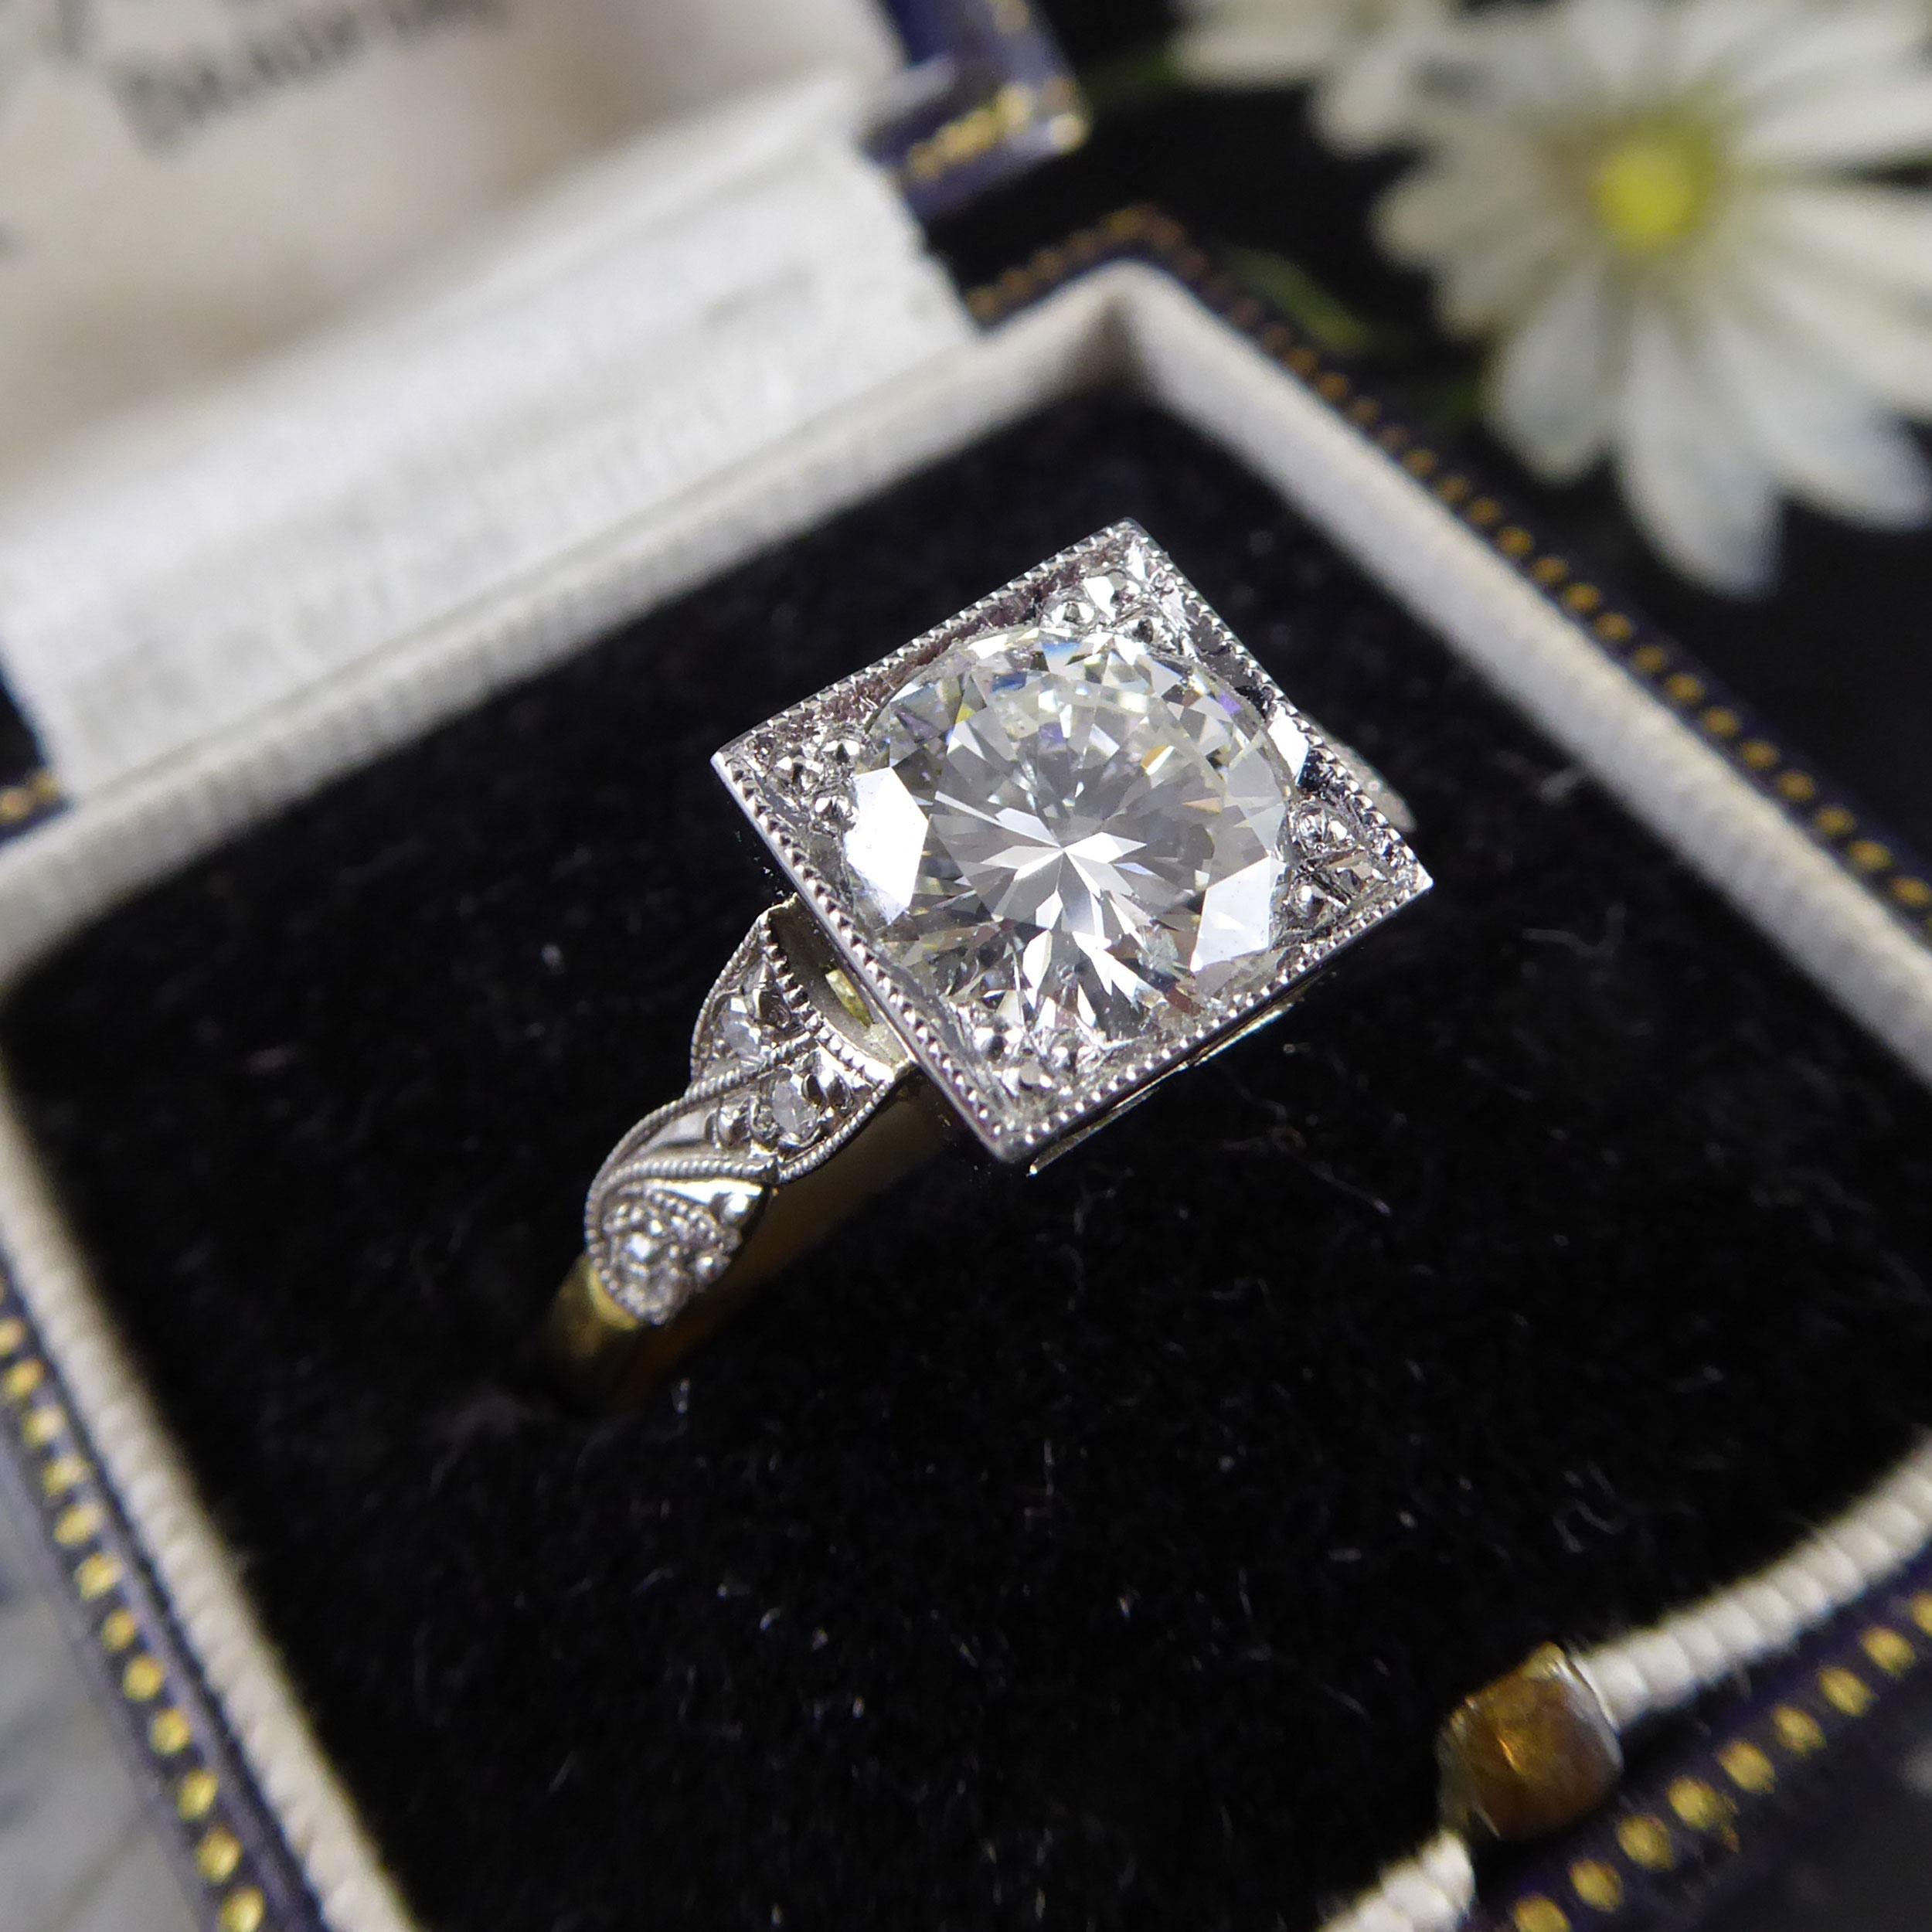 What an exquisite solitaire ring this is; a round diamond set in a square mount.  The diamond is set with four claws within a millegrain border.  The mount is open allowing the light to filter through the diamond  unhindered and has a faintly Art